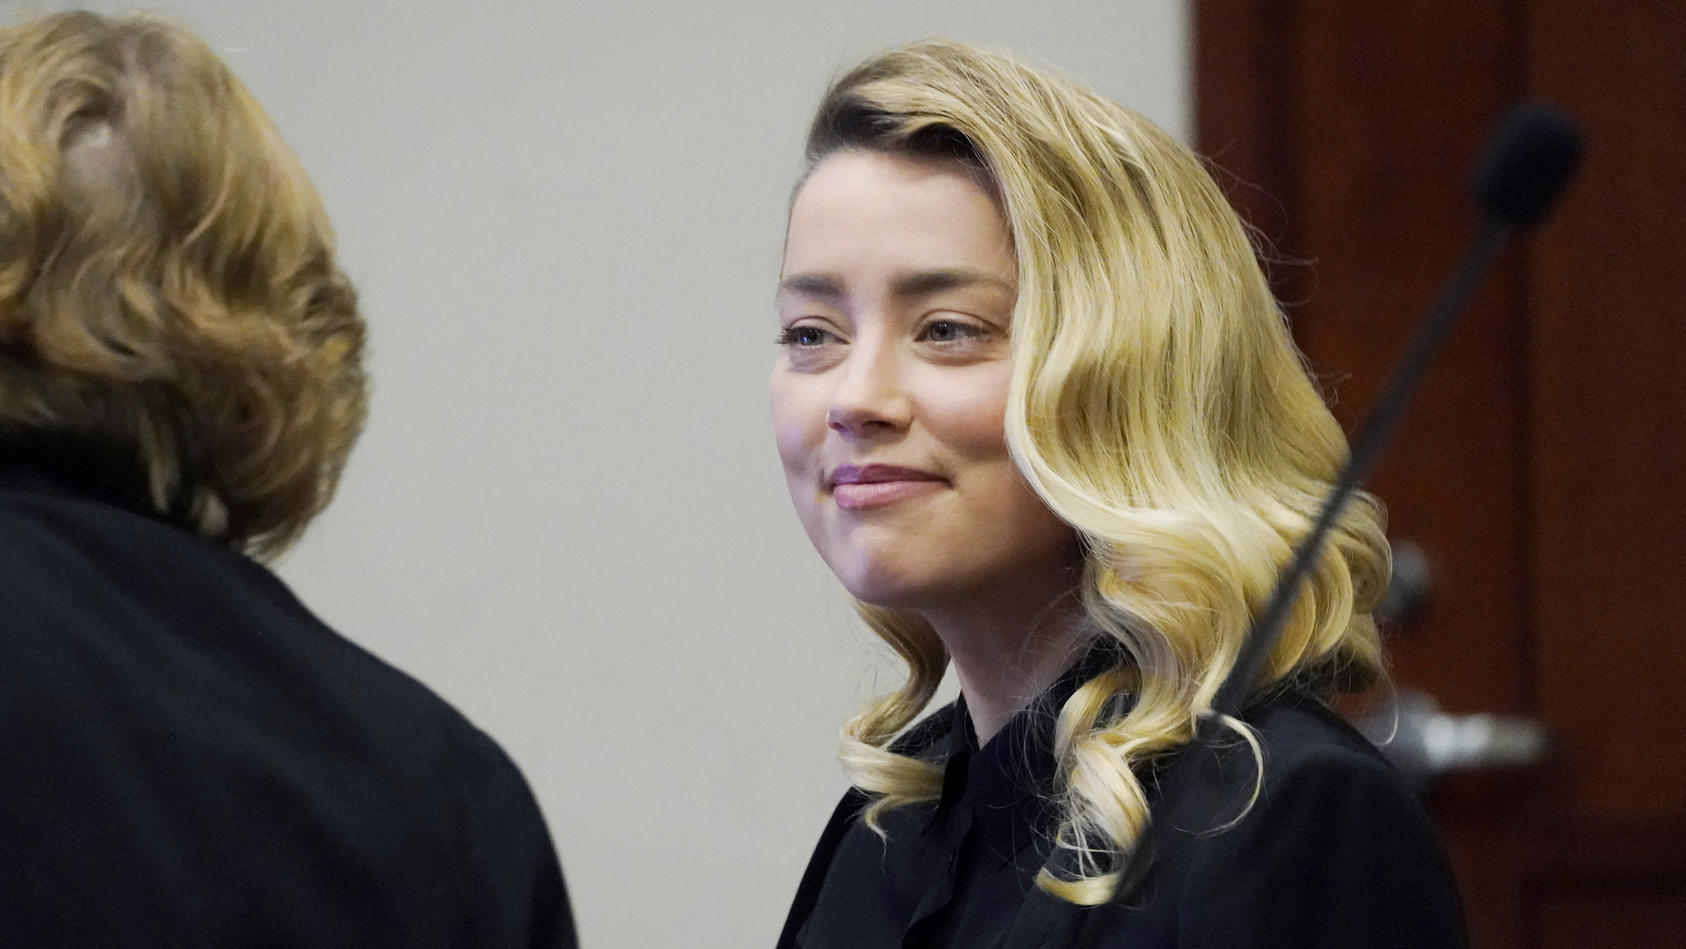 Actress Amber Heard talks to her attorney in the courtroom at the Fairfax County Circuit Court in Fairfax, Va., Monday April 18, 2022. Actor Johnny Depp sued his ex-wife Amber Heard for libel in Fairfax County Circuit Court after she wrote an op-ed p